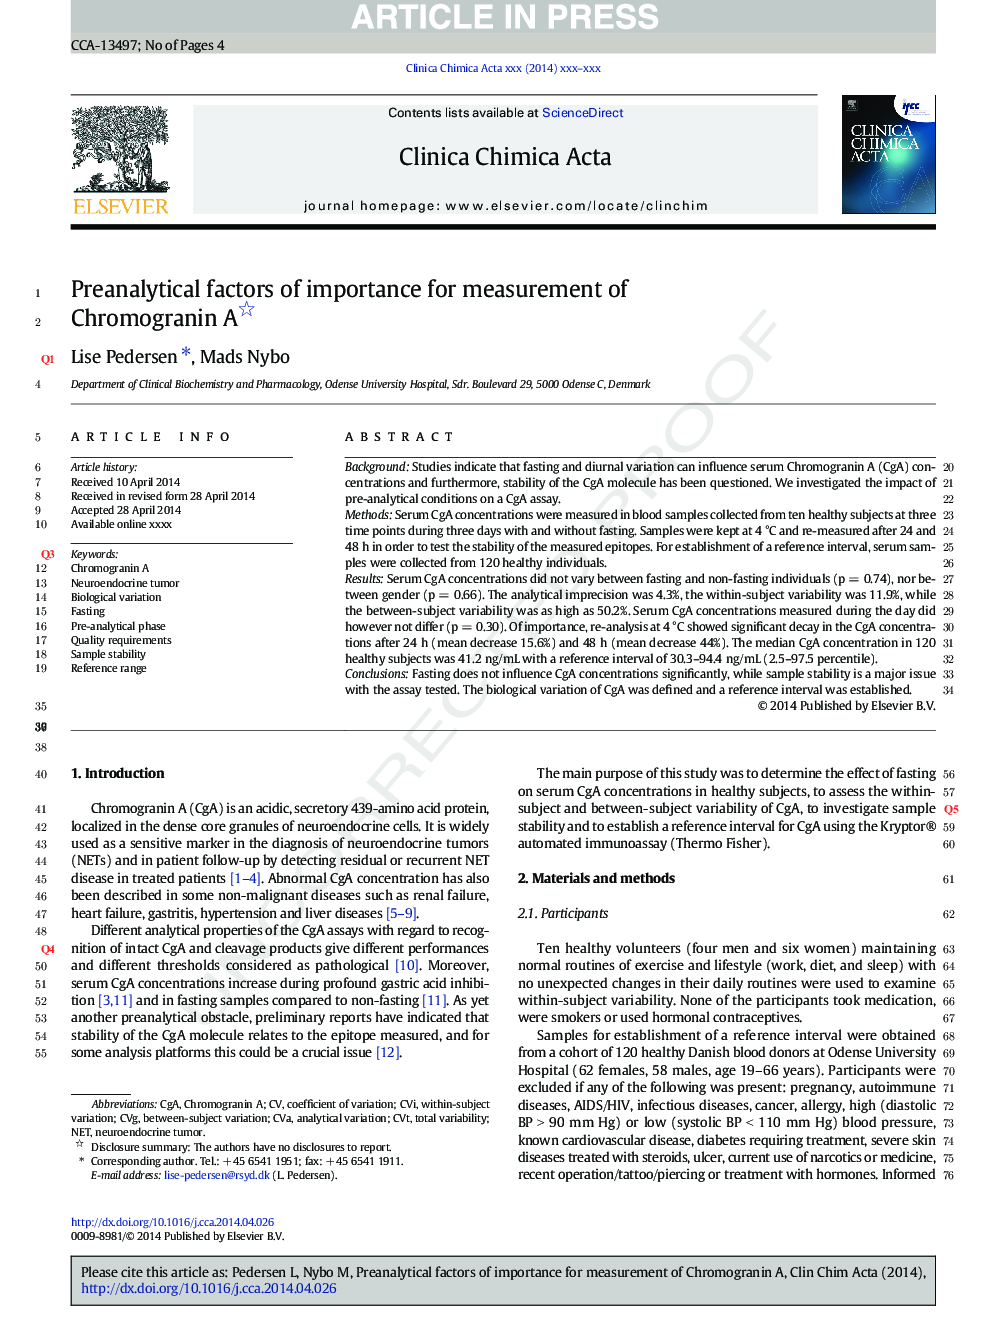 Preanalytical factors of importance for measurement of Chromogranin A